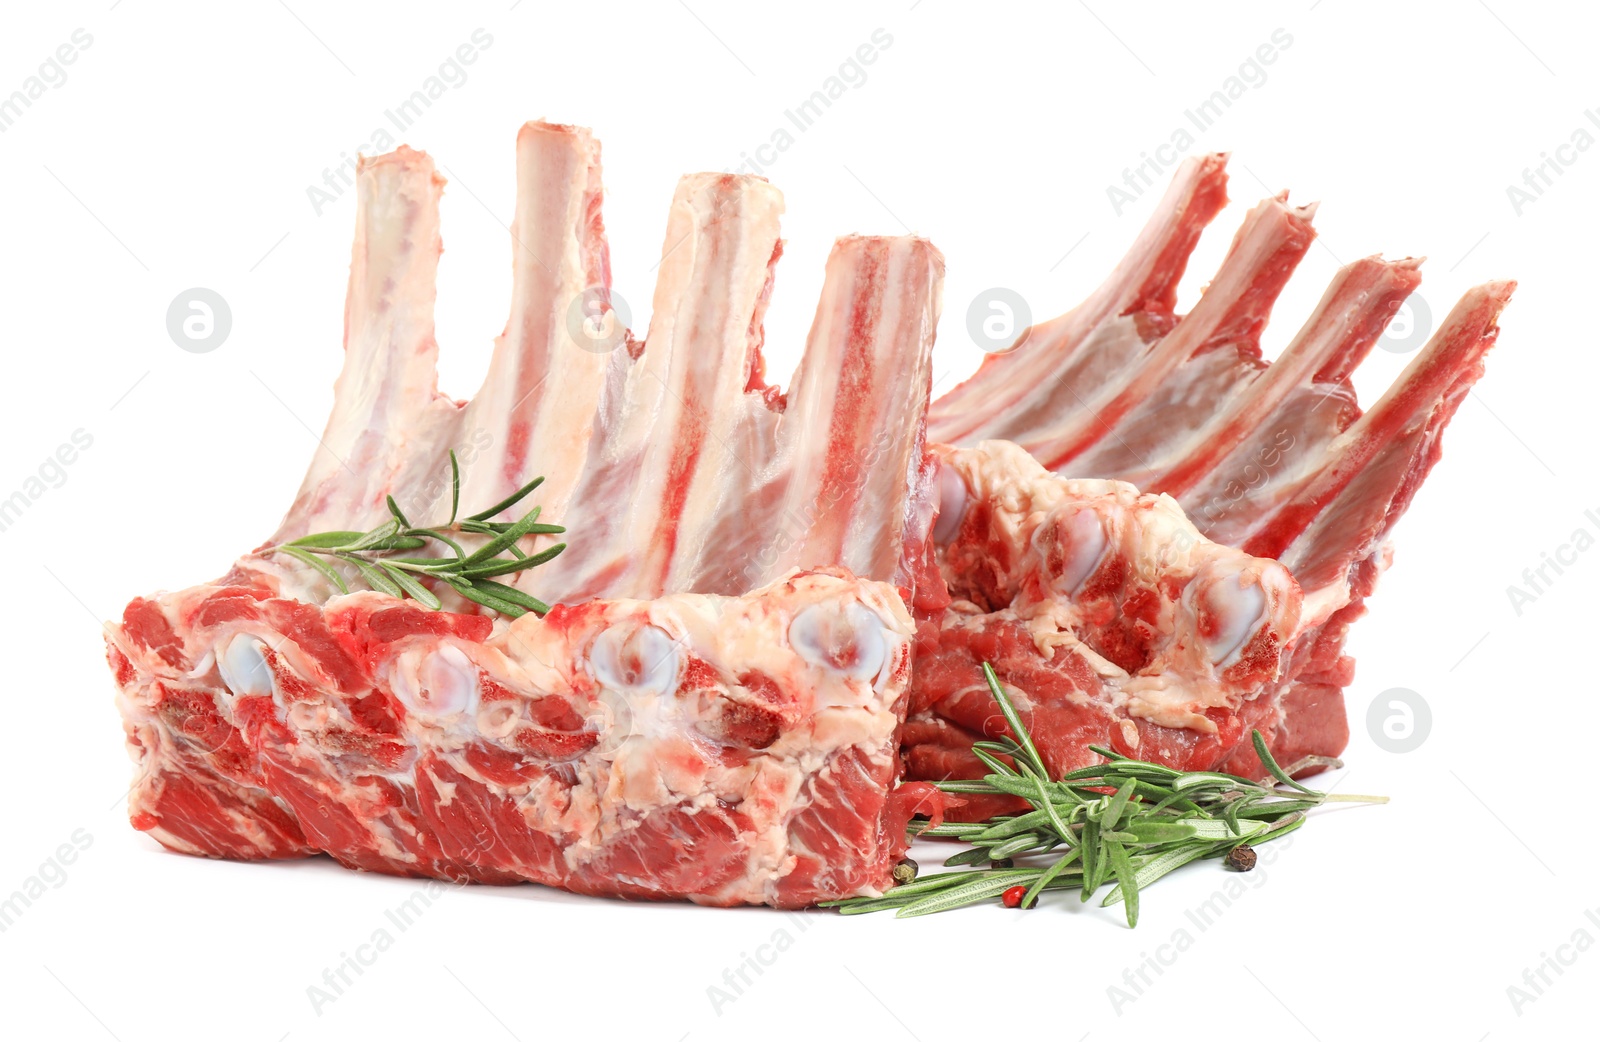 Photo of Raw ribs with rosemary and pepper on white background